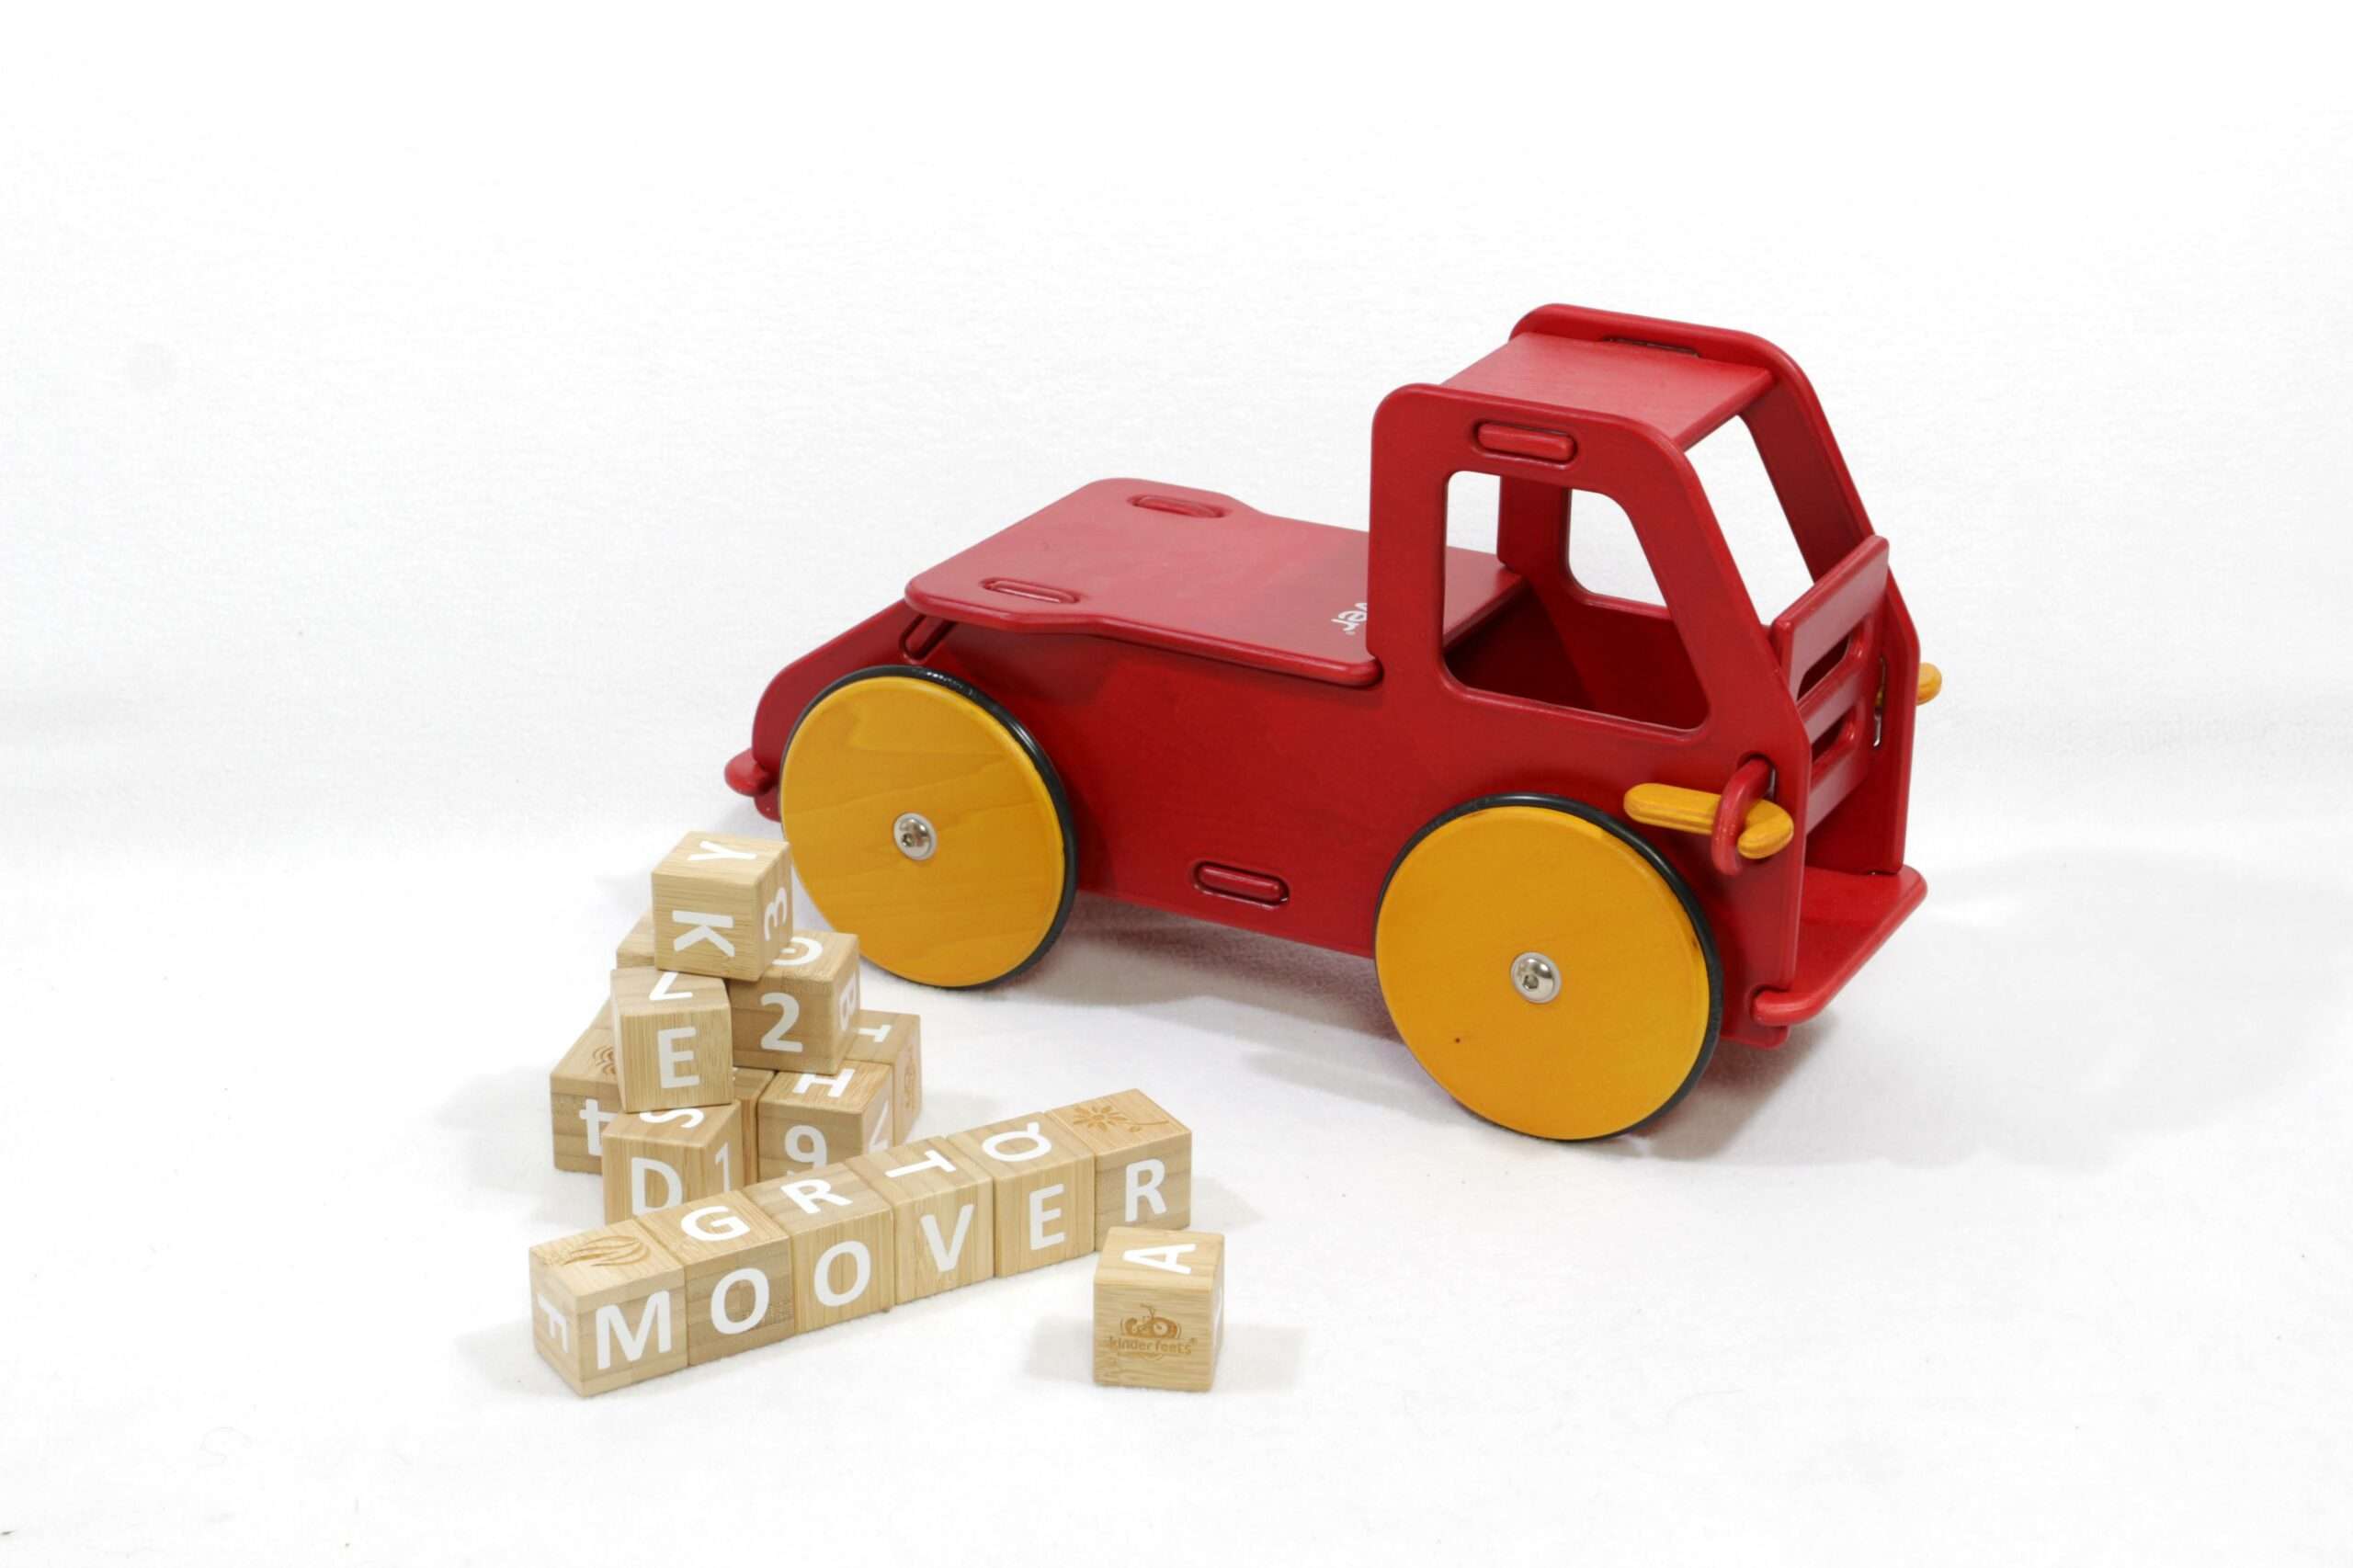 Moover Small Ride-On Truck | Red | GOMToys